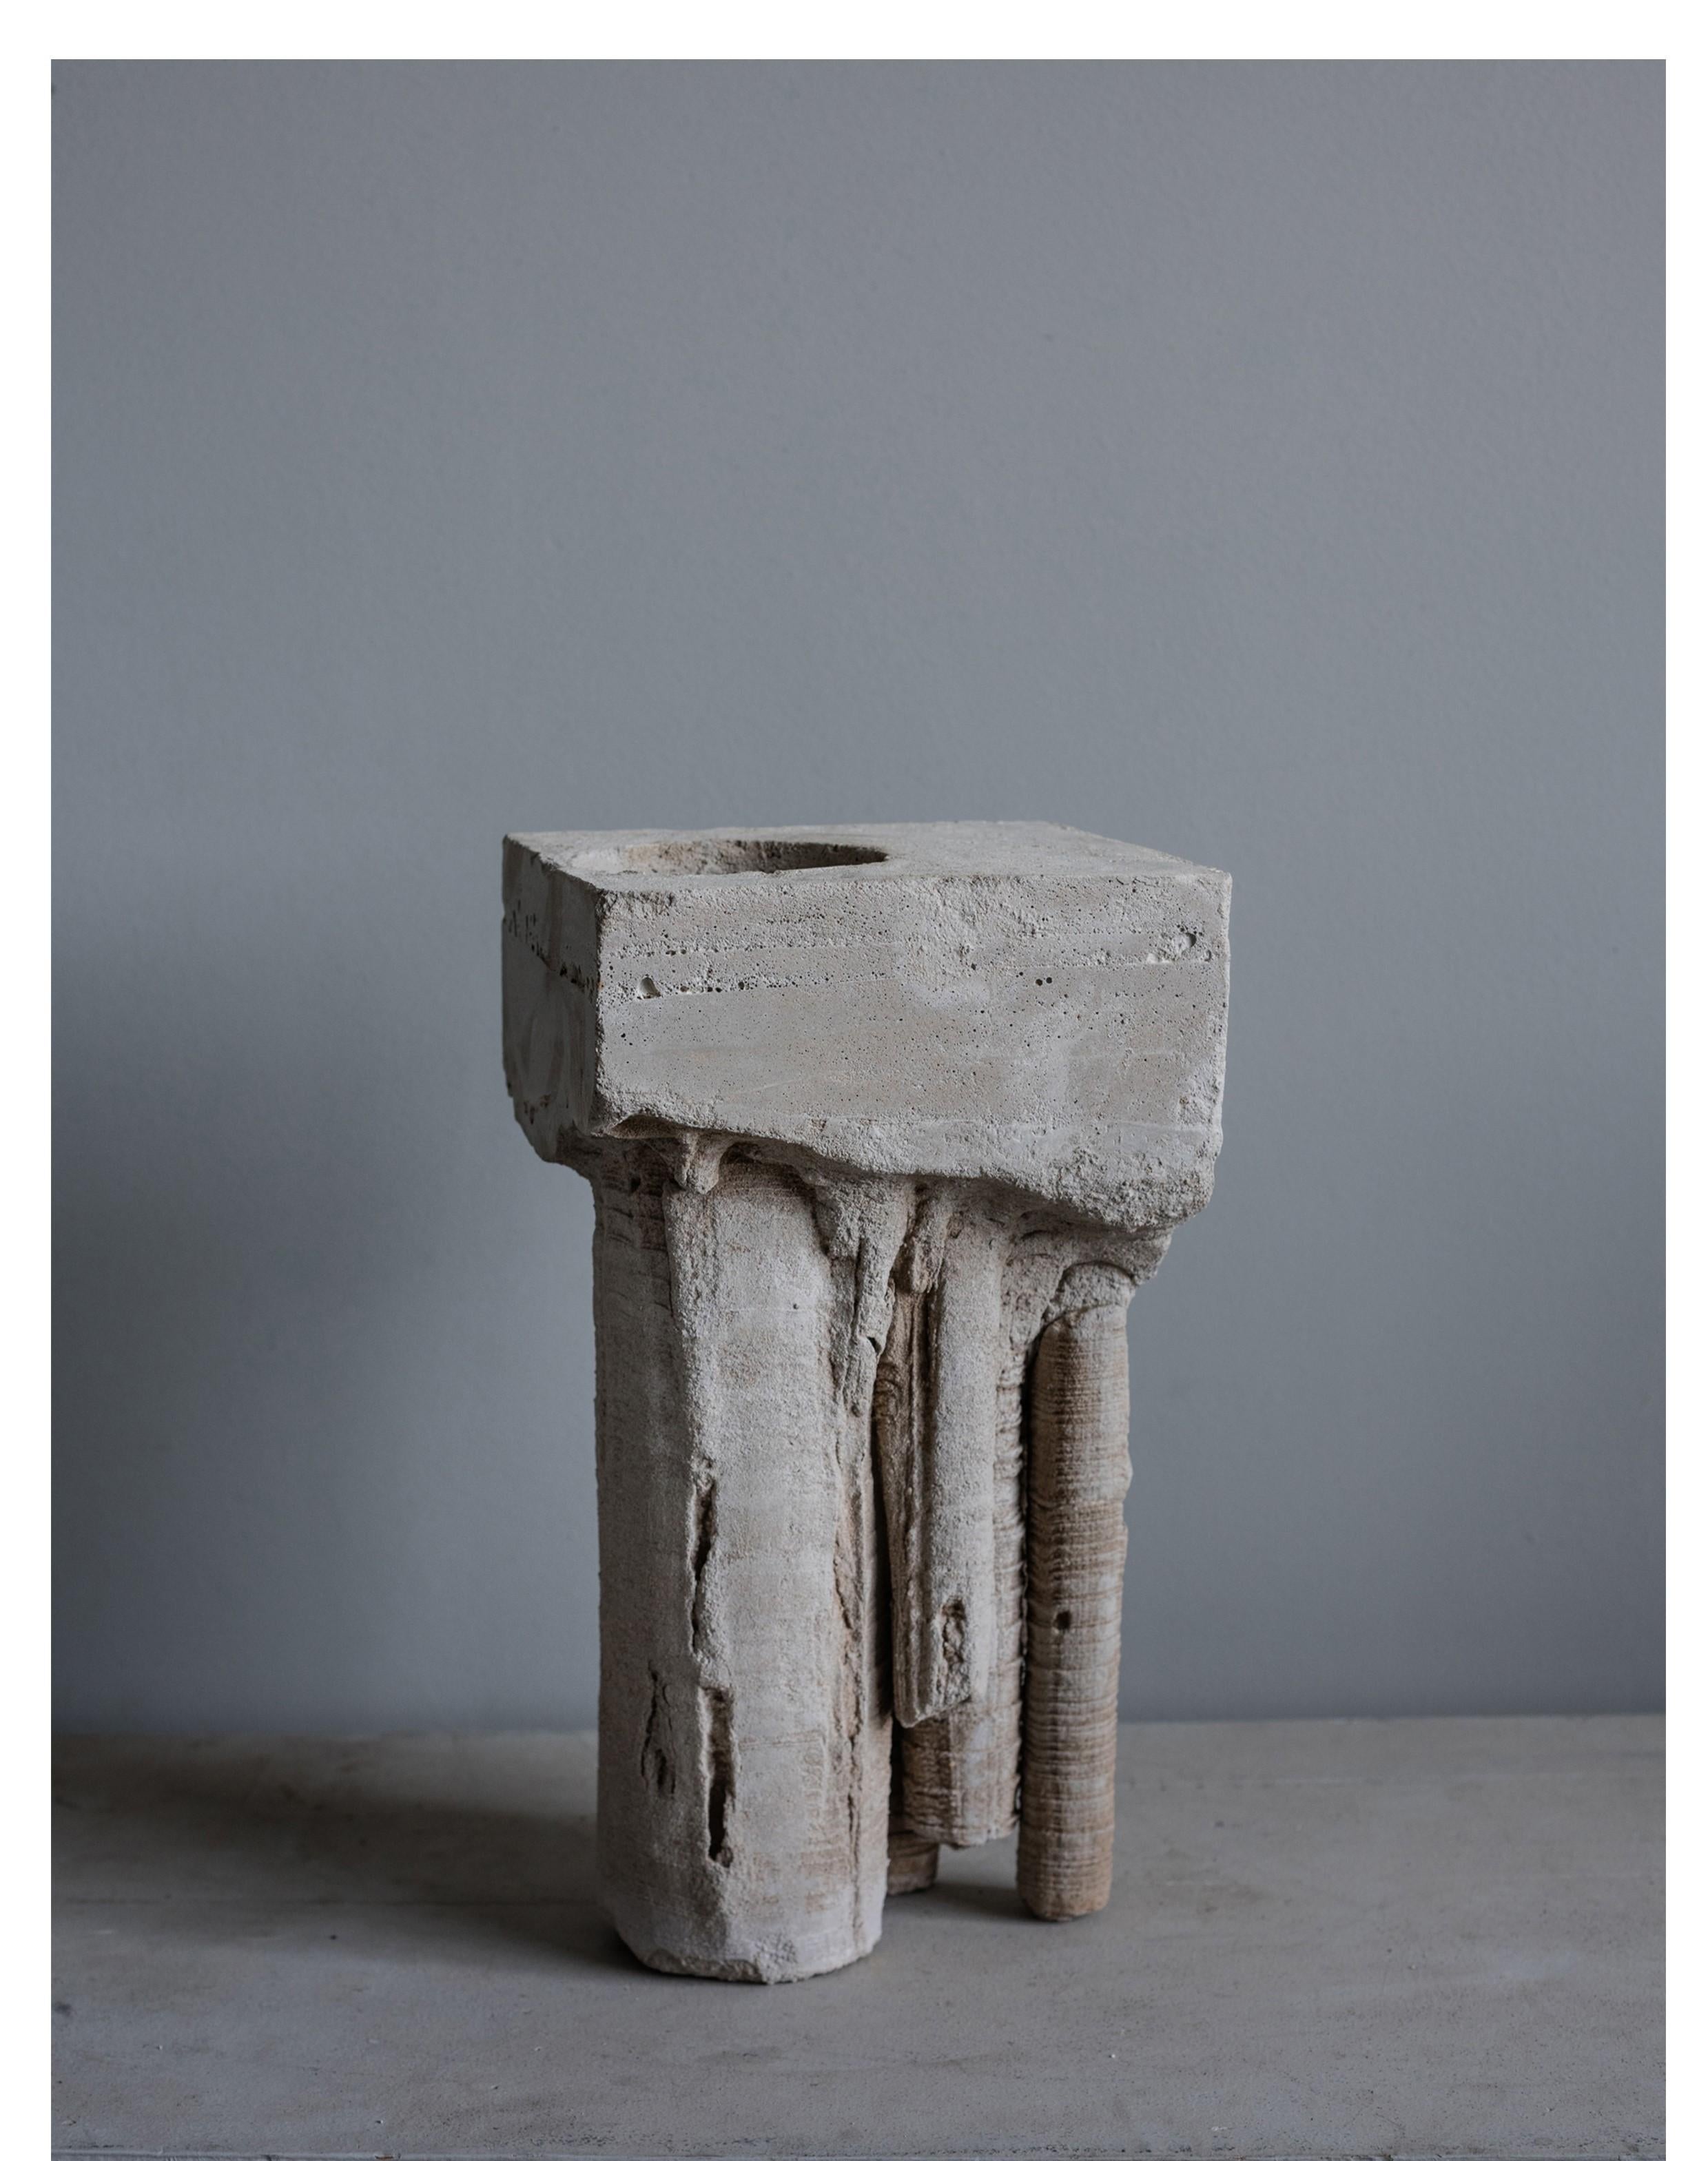 Geomorphic Vase by Christian Zahr
Dimensions: W 20 x D 19 x H 37 cm
Materials: Cement- Sand- Water- Time.

Each Piece is Handmade.

Geomorphic Archeology: Unearthing the Ephemeral - Indoor primitive landscapes (furniture and objects). Sand